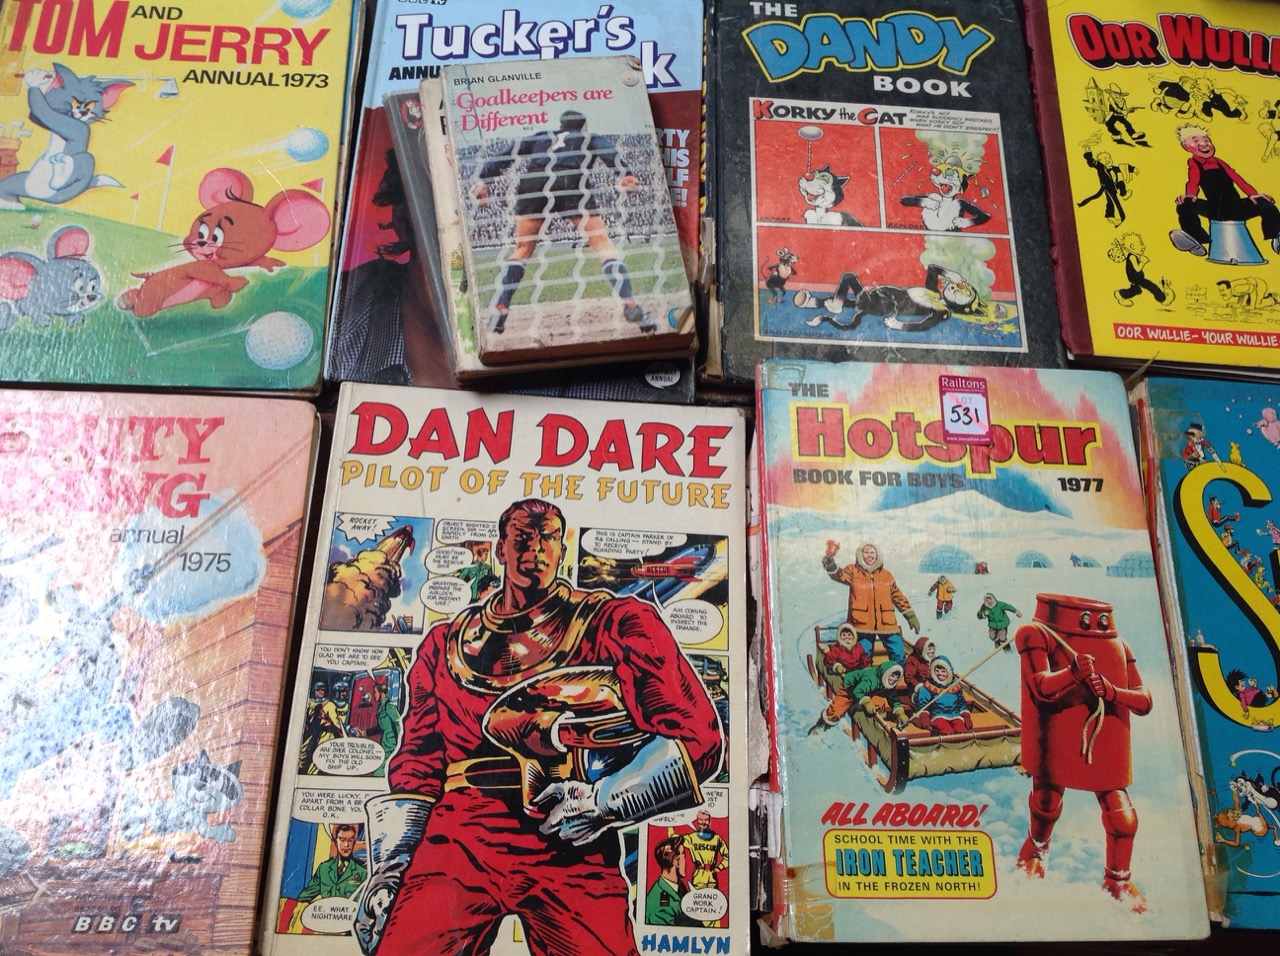 A quantity of 70s childrens books - football, Broons, Our Willie, Dandy, Sparky, The Beezer, Dan